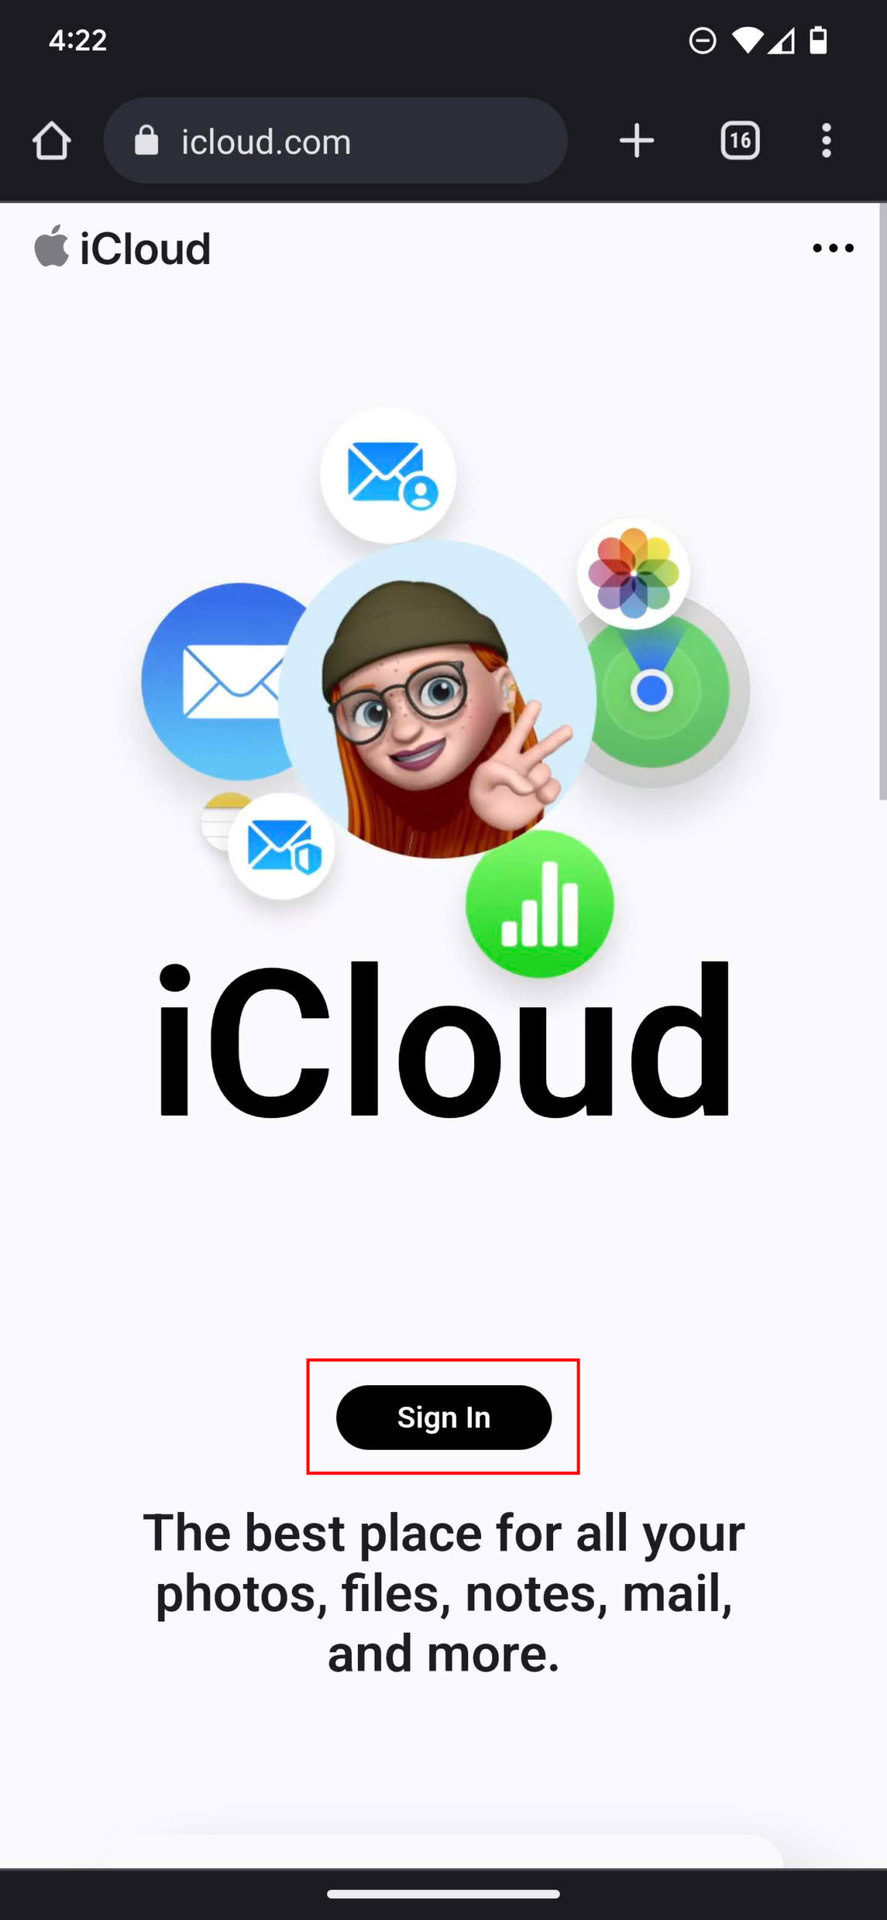 Yes, you can access iCloud from your Android device